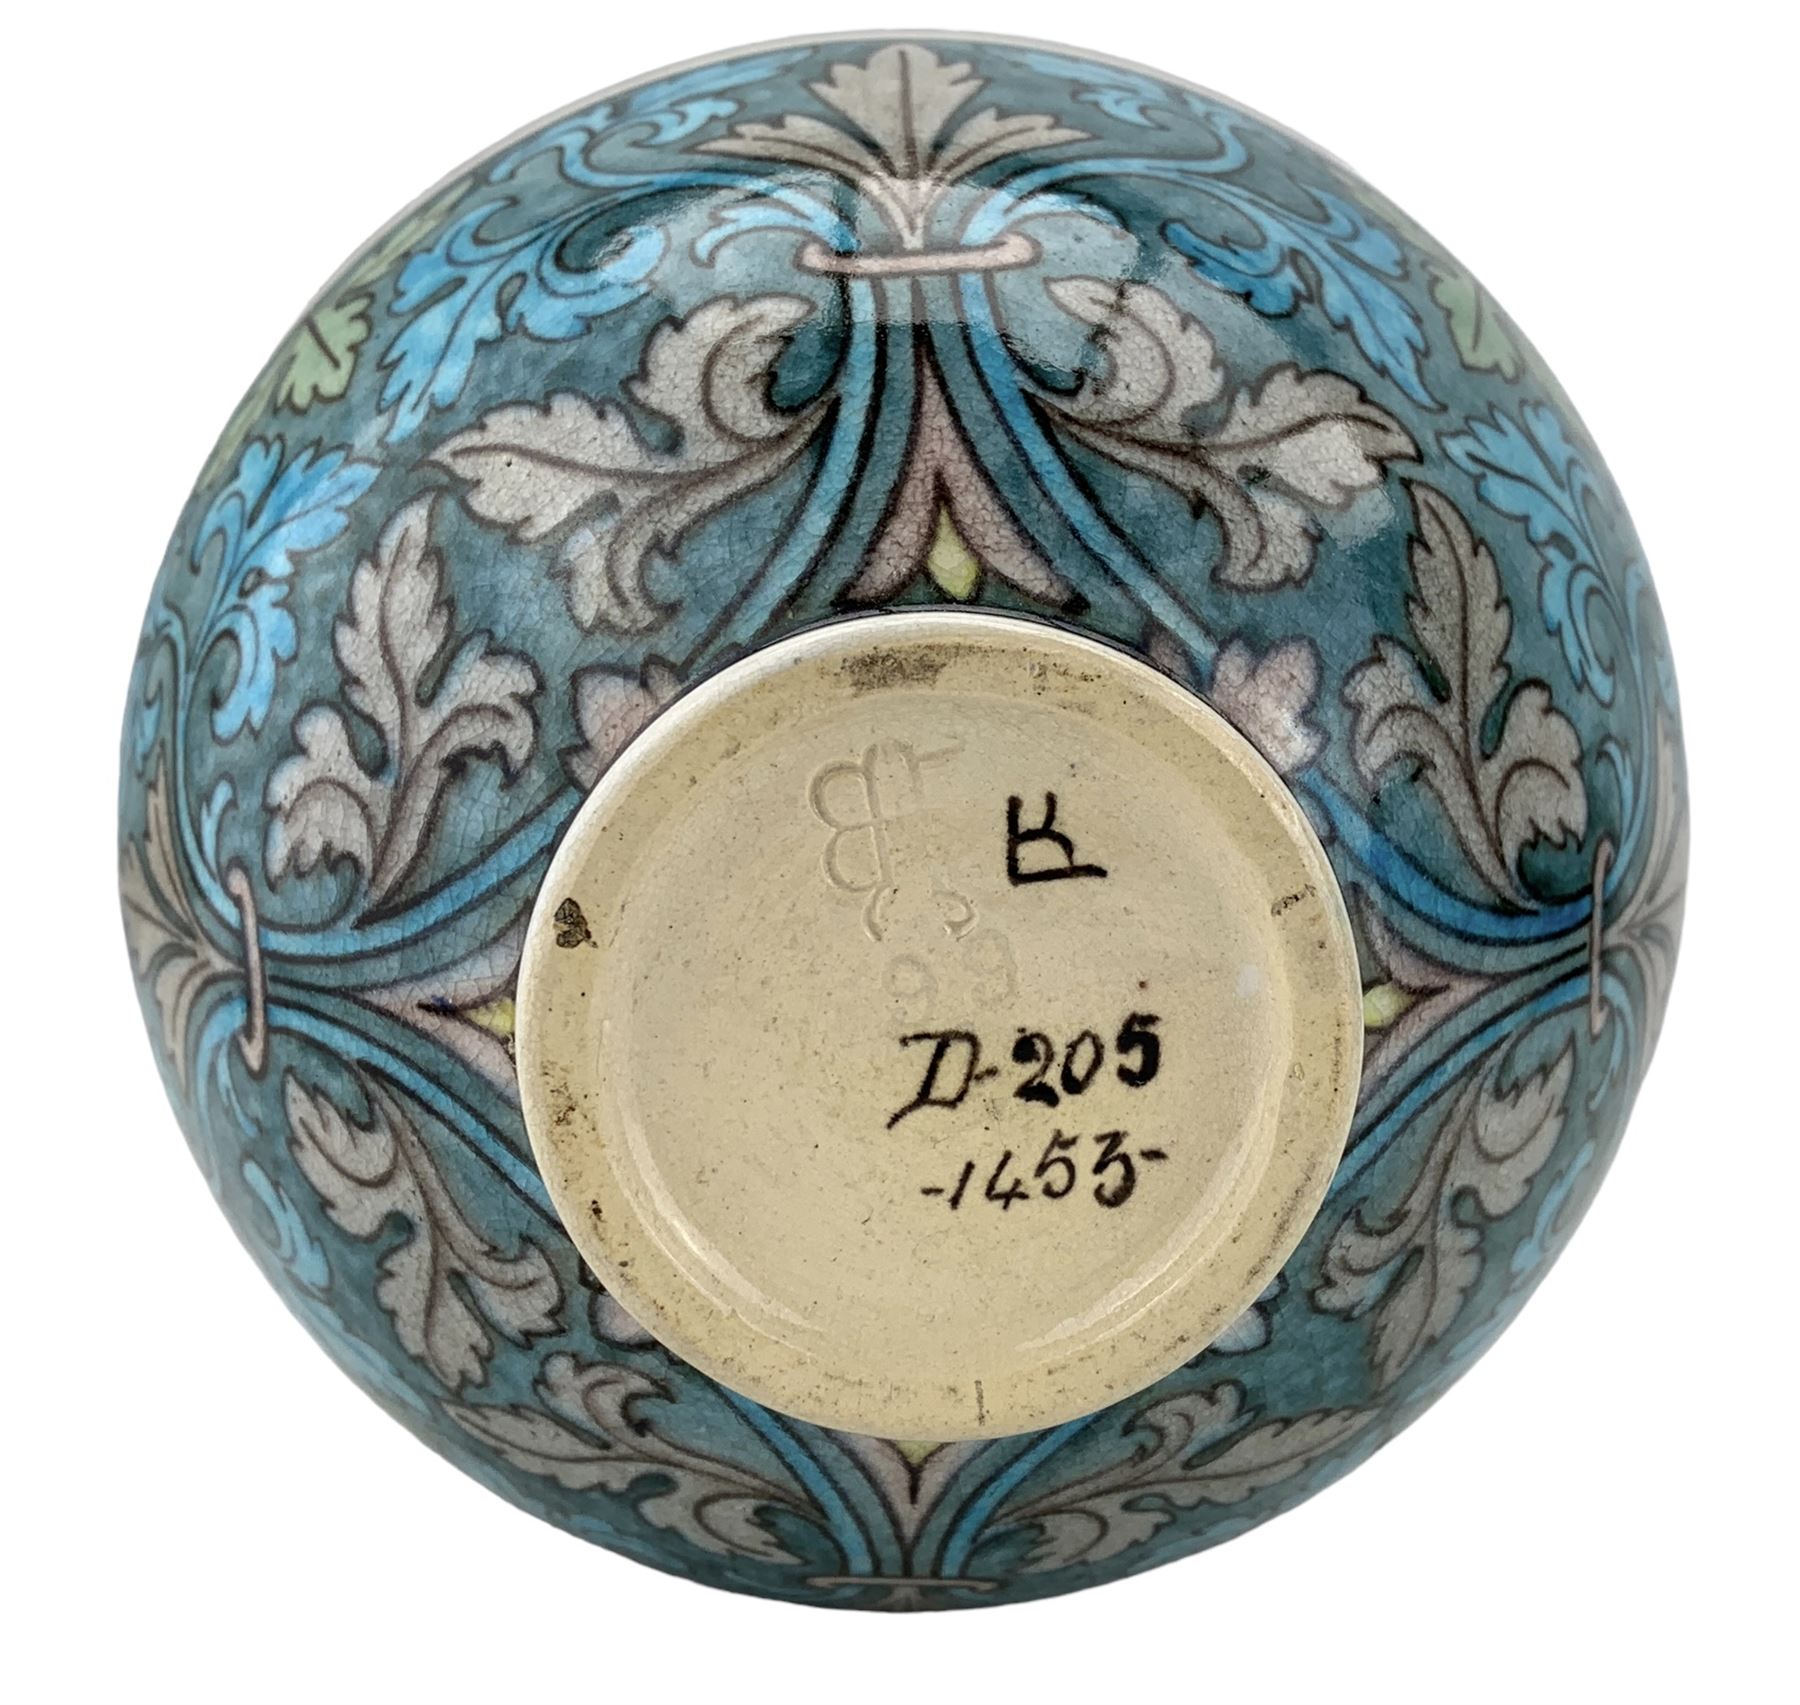 Burmantofts Faience Anglo-Persian vase - Image 6 of 6